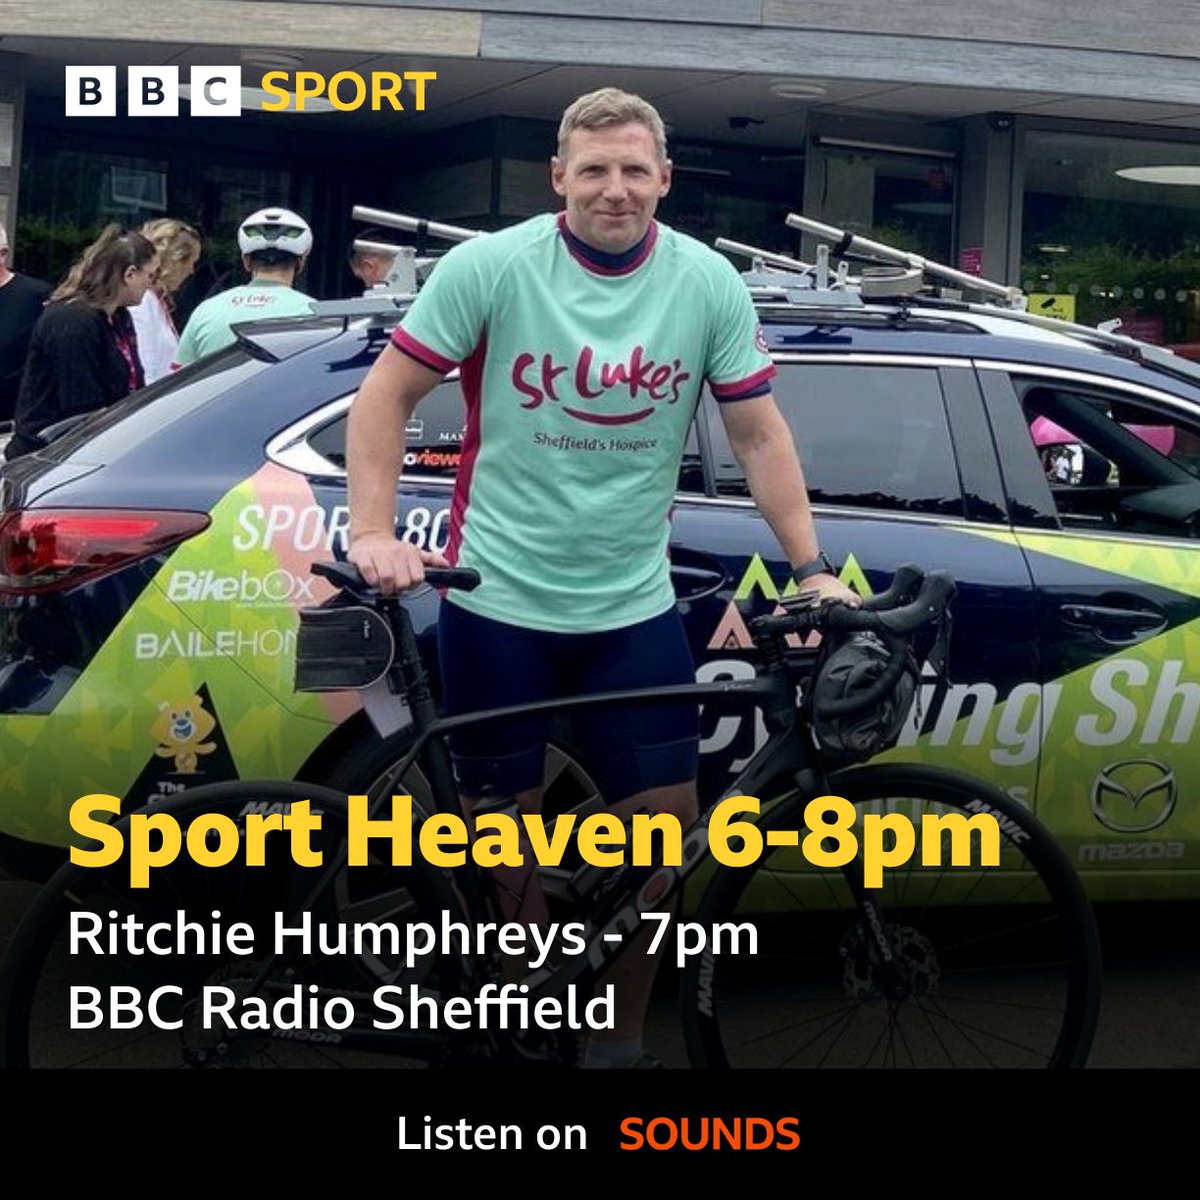 📢 TONIGHT FROM 6PM!

📞 Your calls on 0800 111 4949

🚲 @ritchiehumphs on #BigJohns500miles for @StLukes_Sheff

🏏 @YorkshireCCC's Adam Lyth

🏉 @SheffieldEagles Director of Rugby Mark Aston

📻 FM & Digital
📺 Freeview 734
📲 @BBCSounds 👇
bbc.in/SH2306

@BBCSheffield